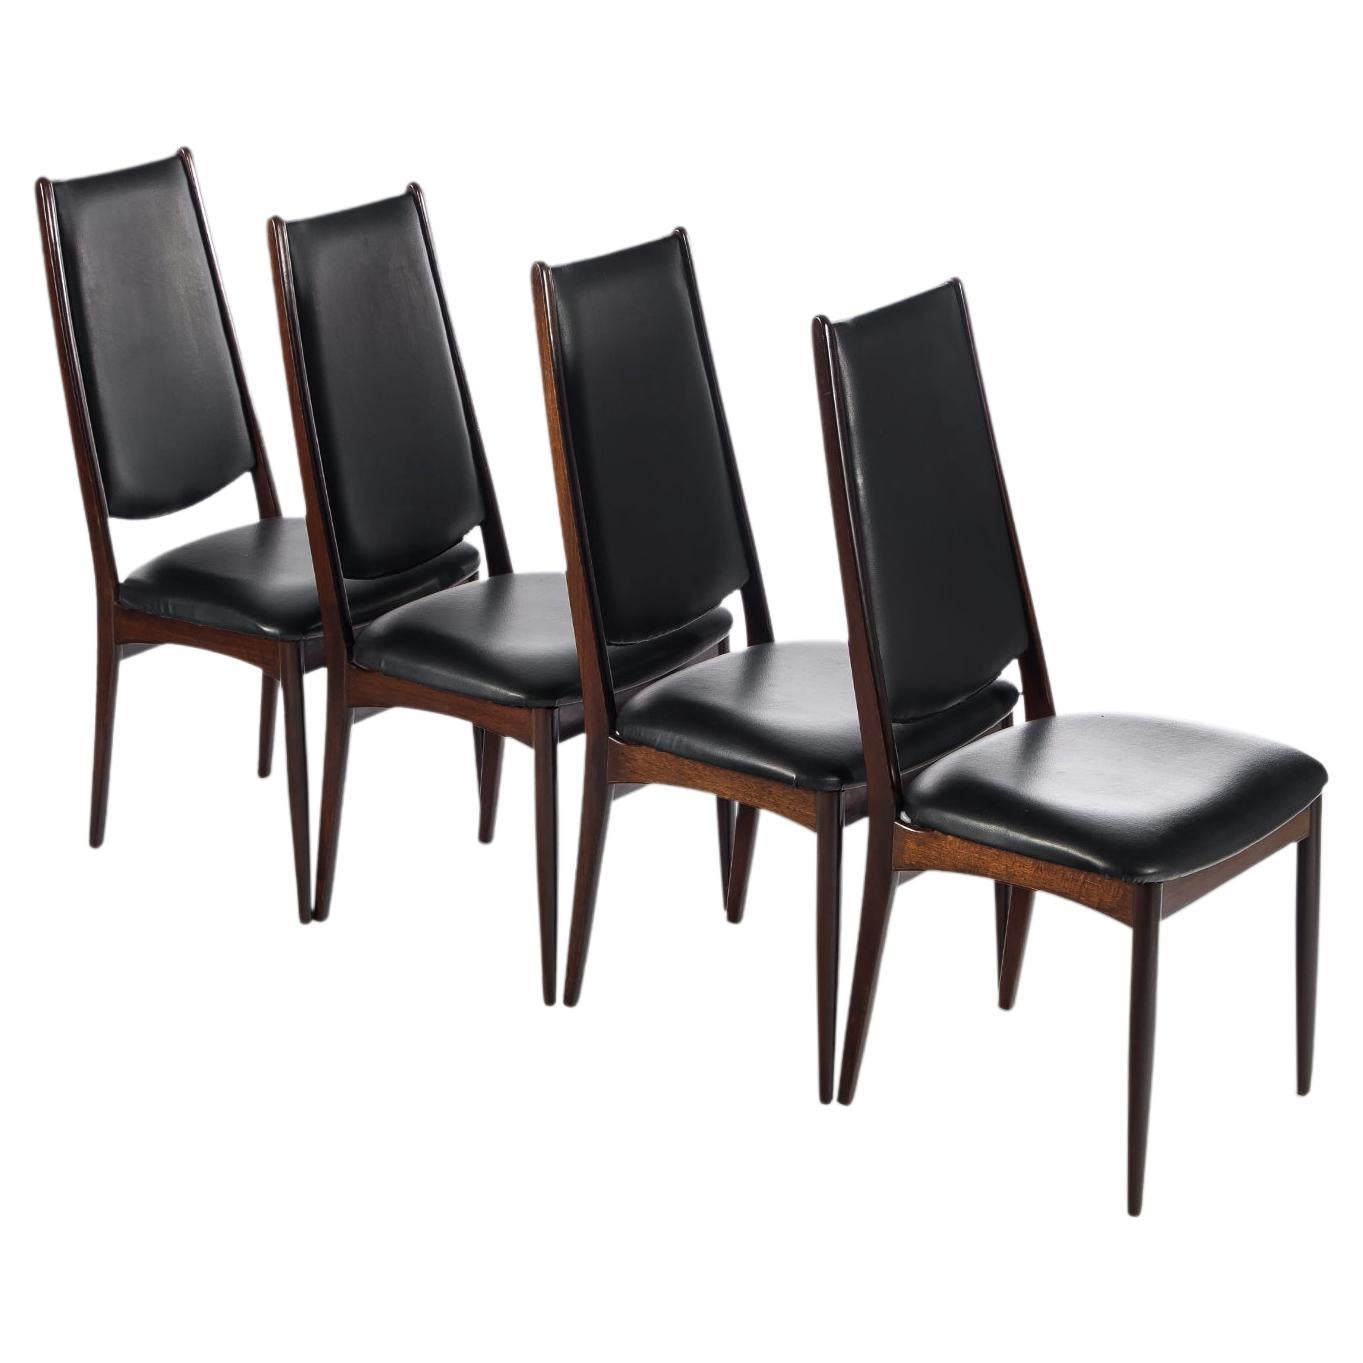 Set of Four (4) Afromosia Danish Modern High Back Dining Chairs, c. 1970s For Sale